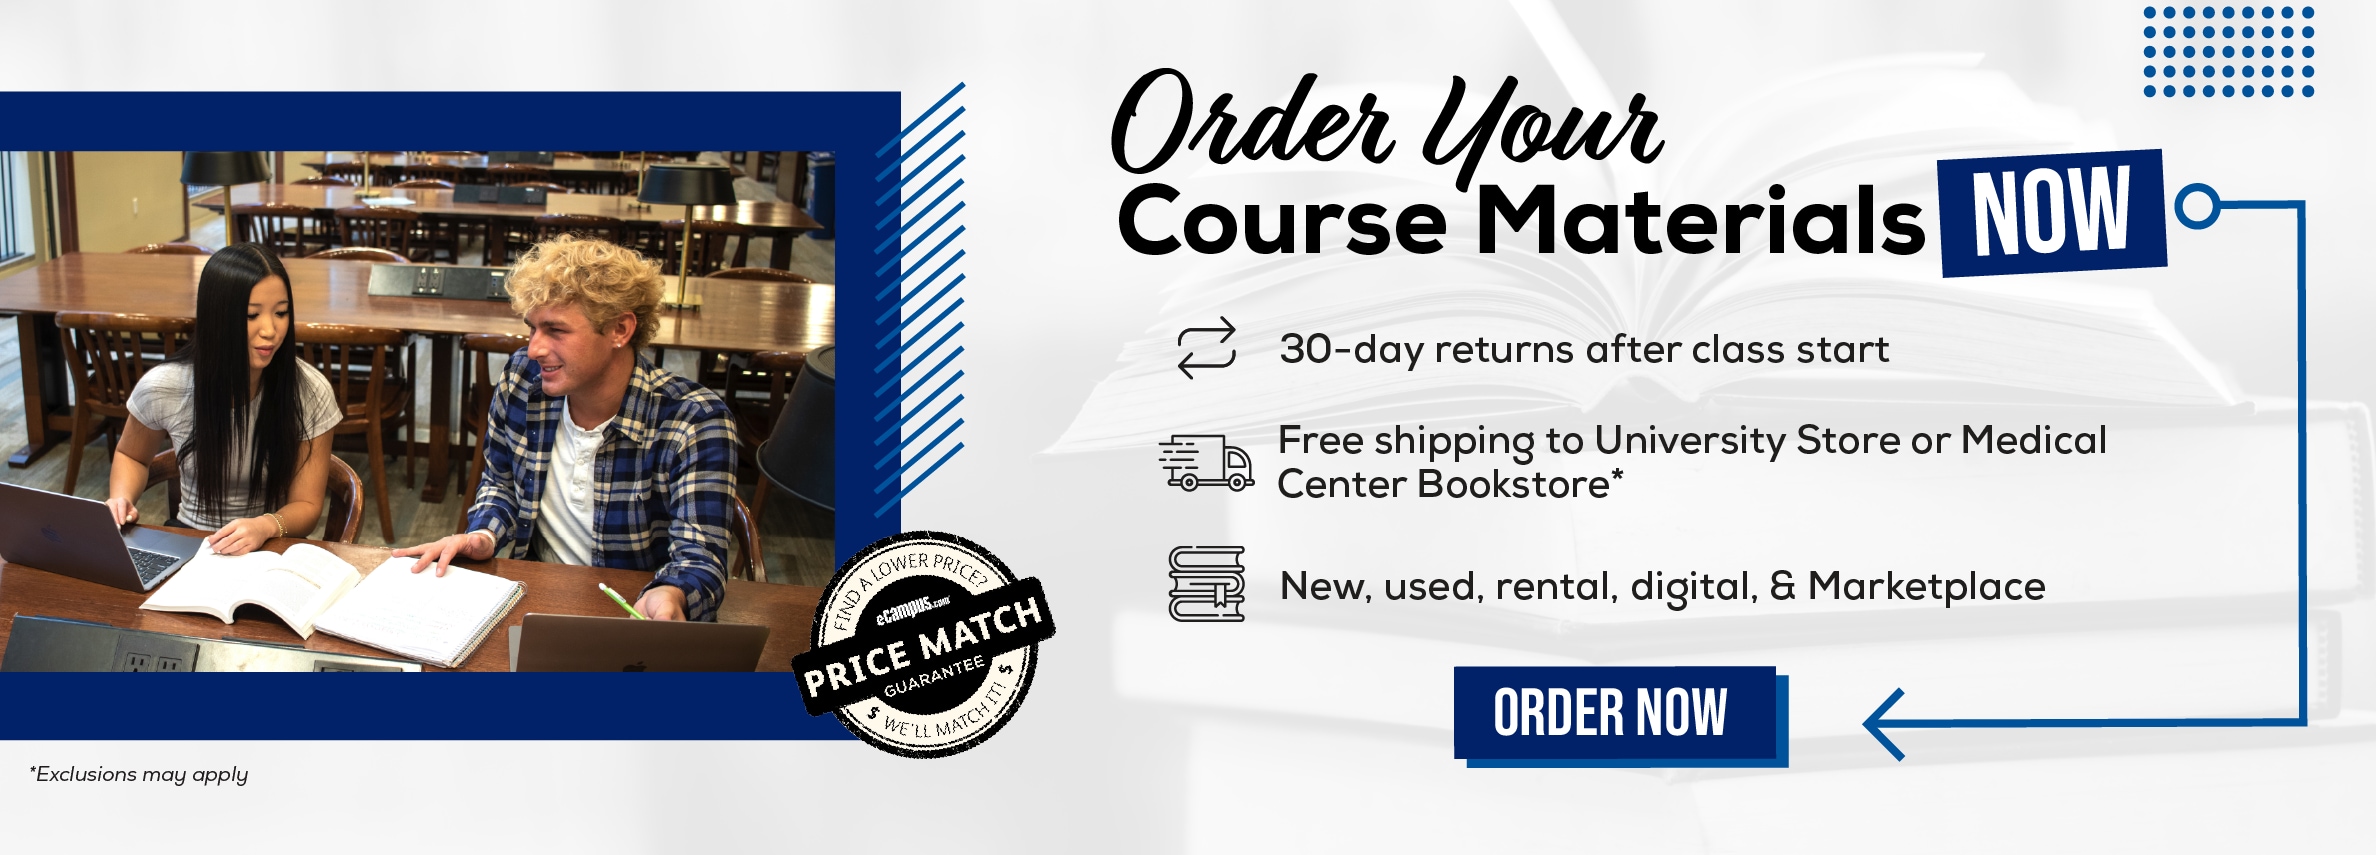 Order Your Course Materials Now. 30-day returns after class start. Free shipping to University Store or Medical Center Bookstore* New, used, rental, digital, & Marketplace. Order now. *Exclusions may apply.